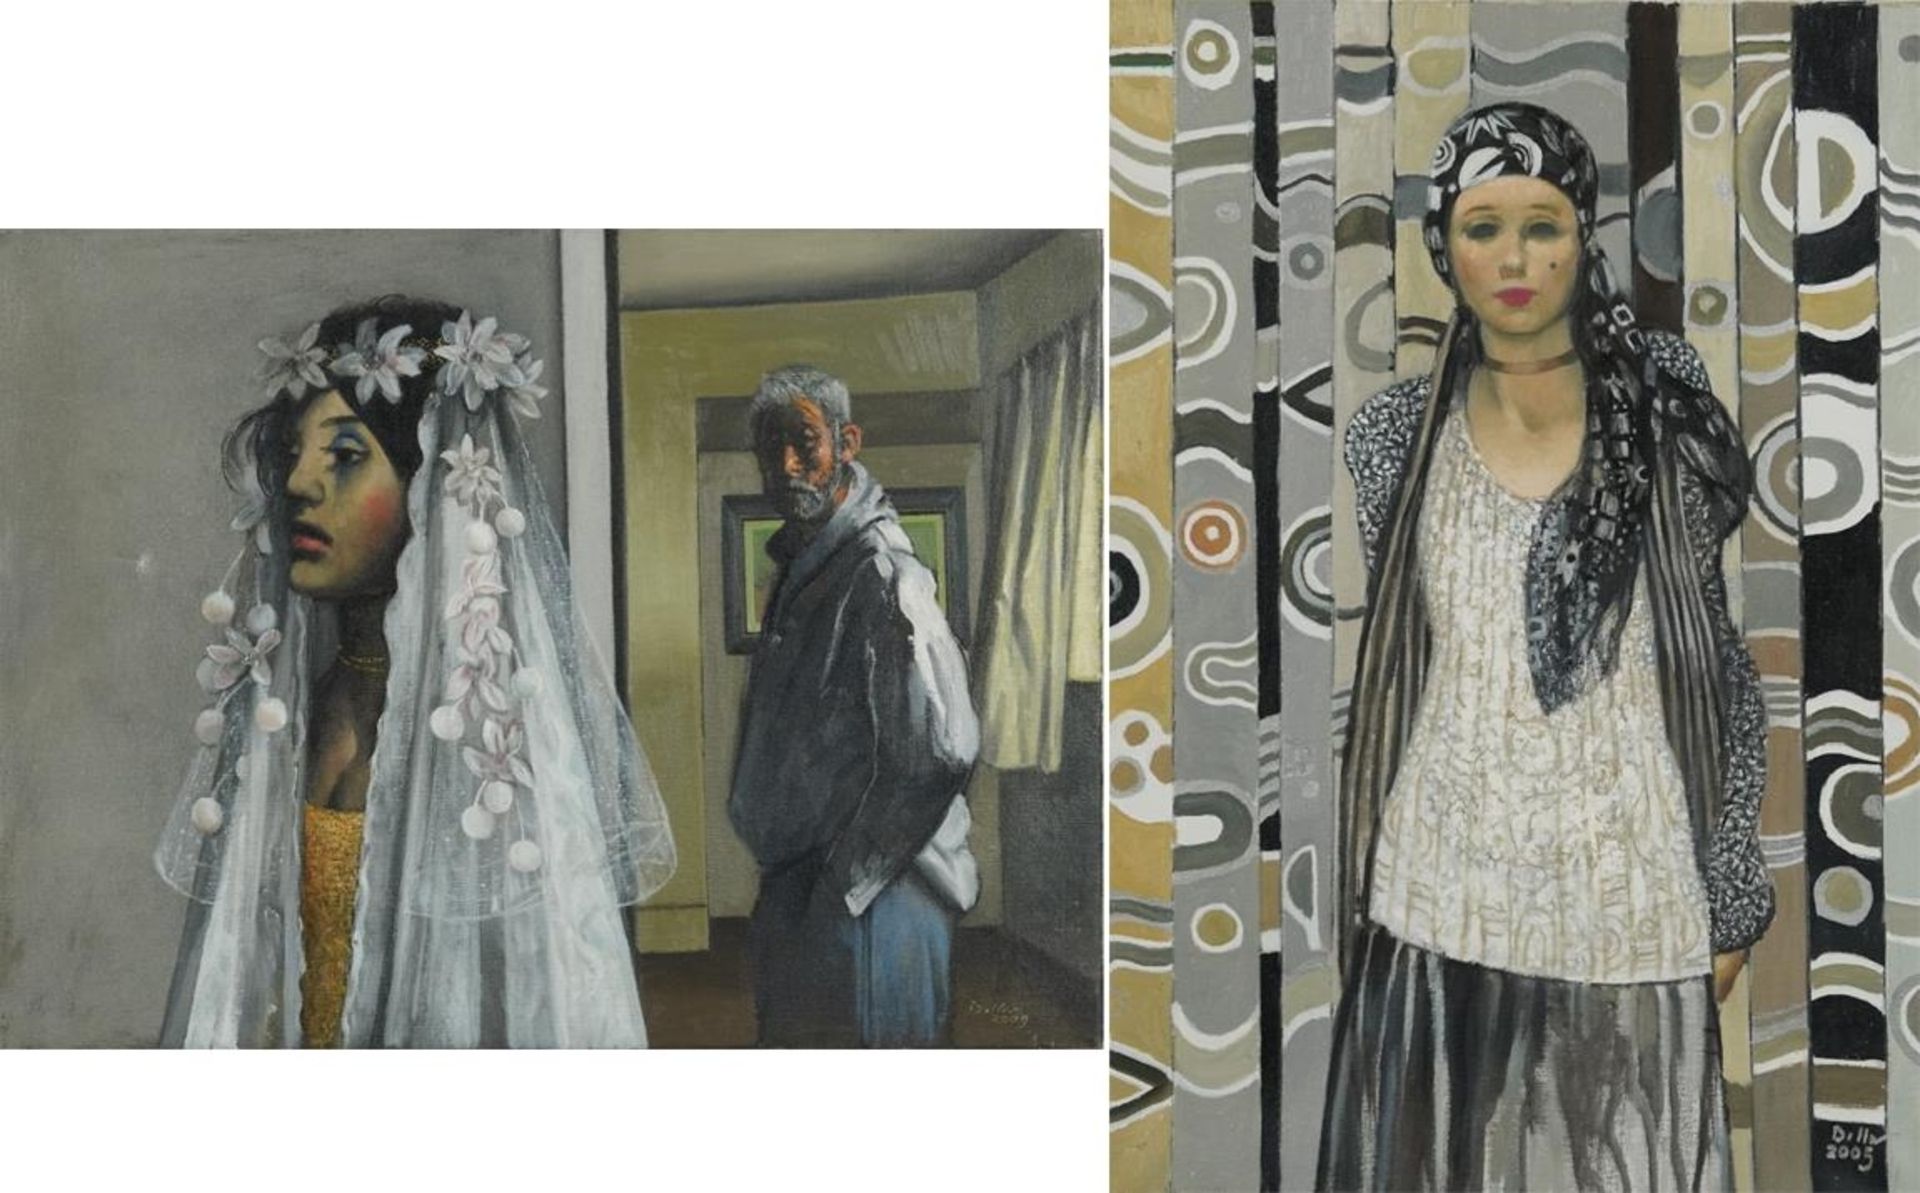 Ron Dellar - Arnold and the Jewish Bride and Sophisticated Lady, two oil on canvasses, each